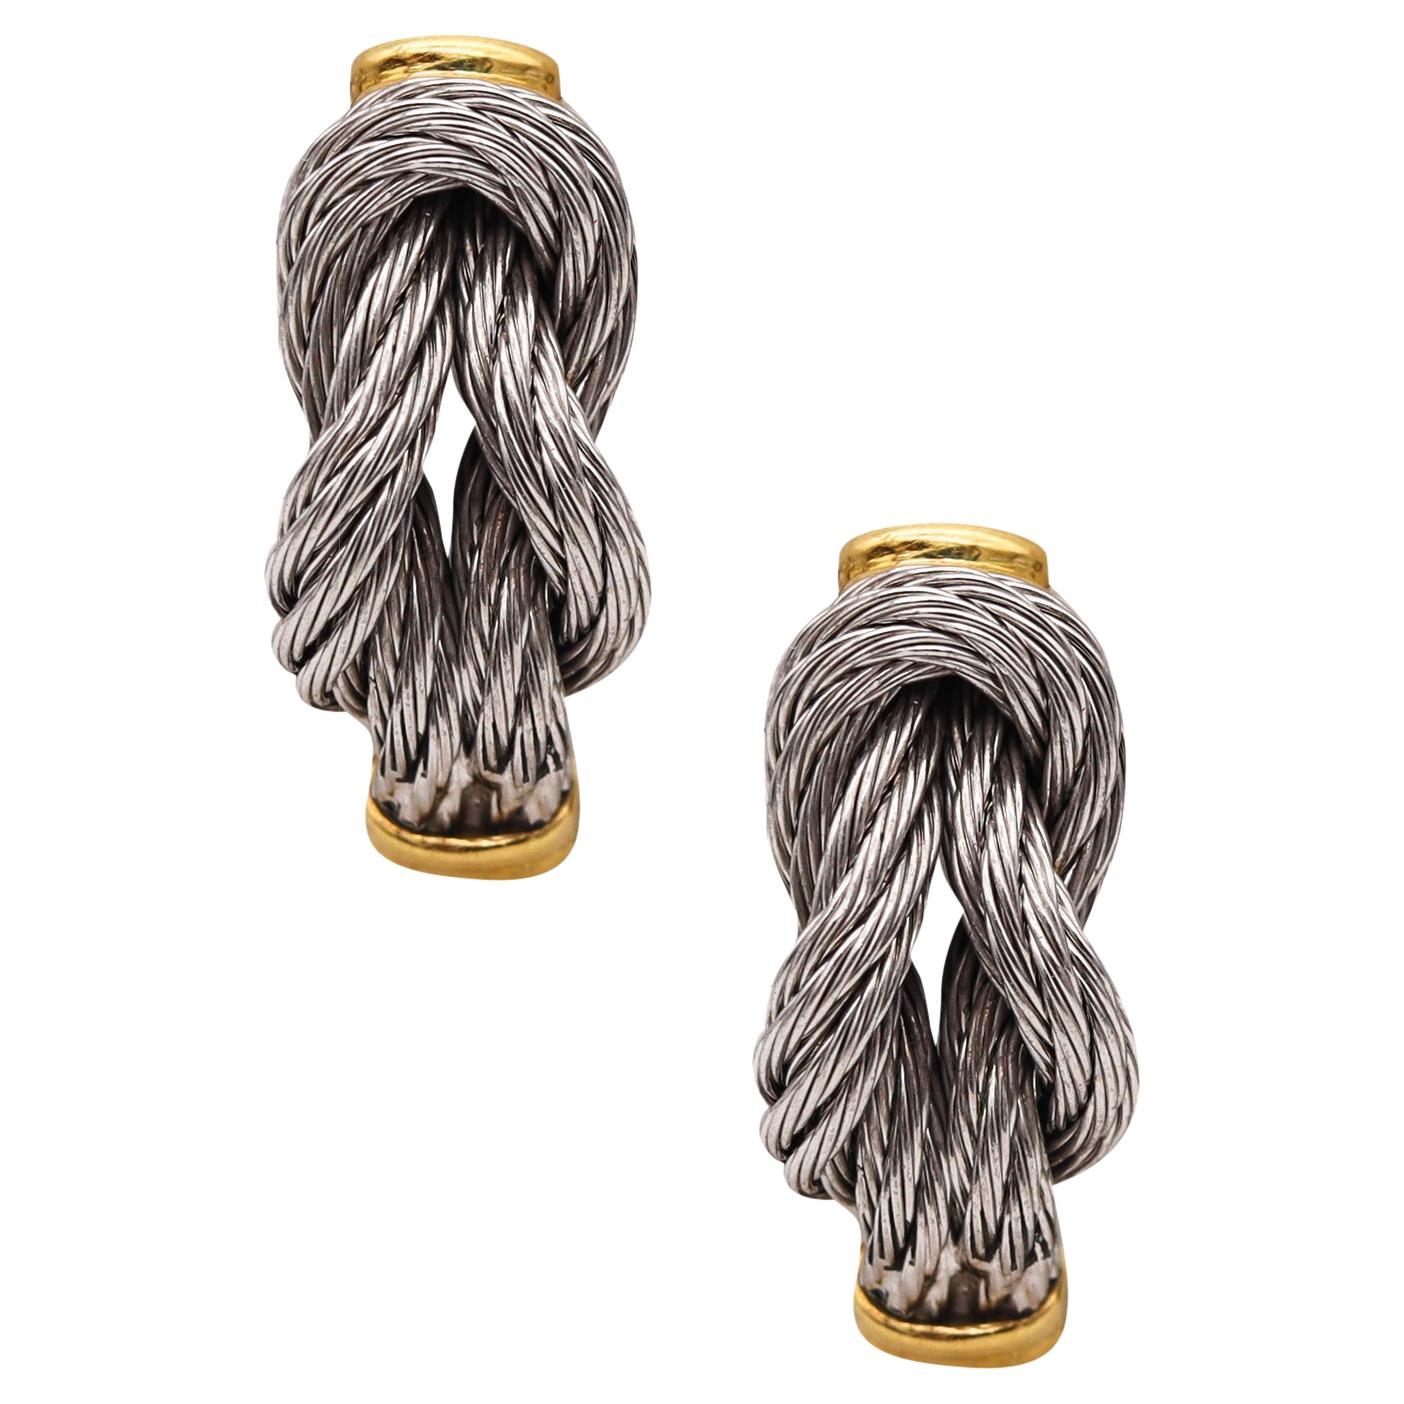 Fred of Paris Modern Hercules Knots Hoops Earrings in 18Kt Yellow Gold and Cable For Sale